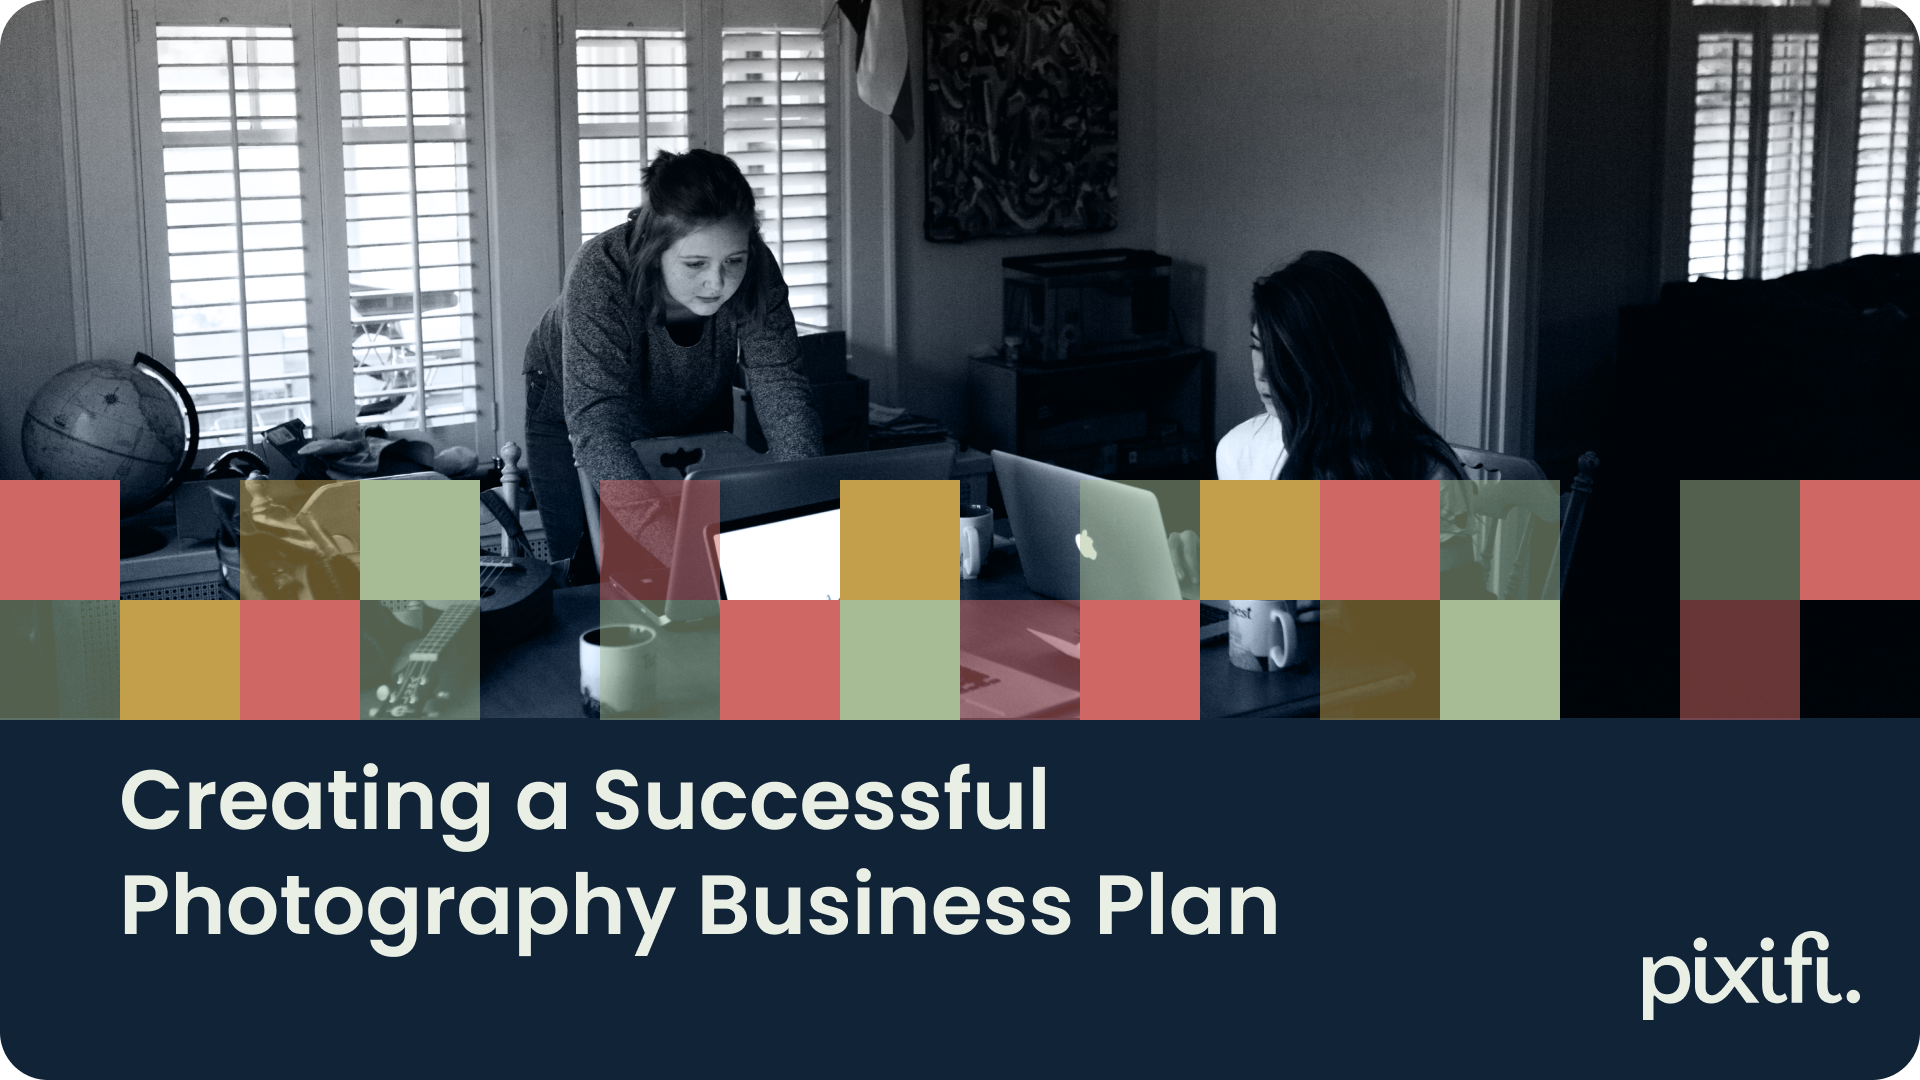 Creating a Successful Photography Business Plan